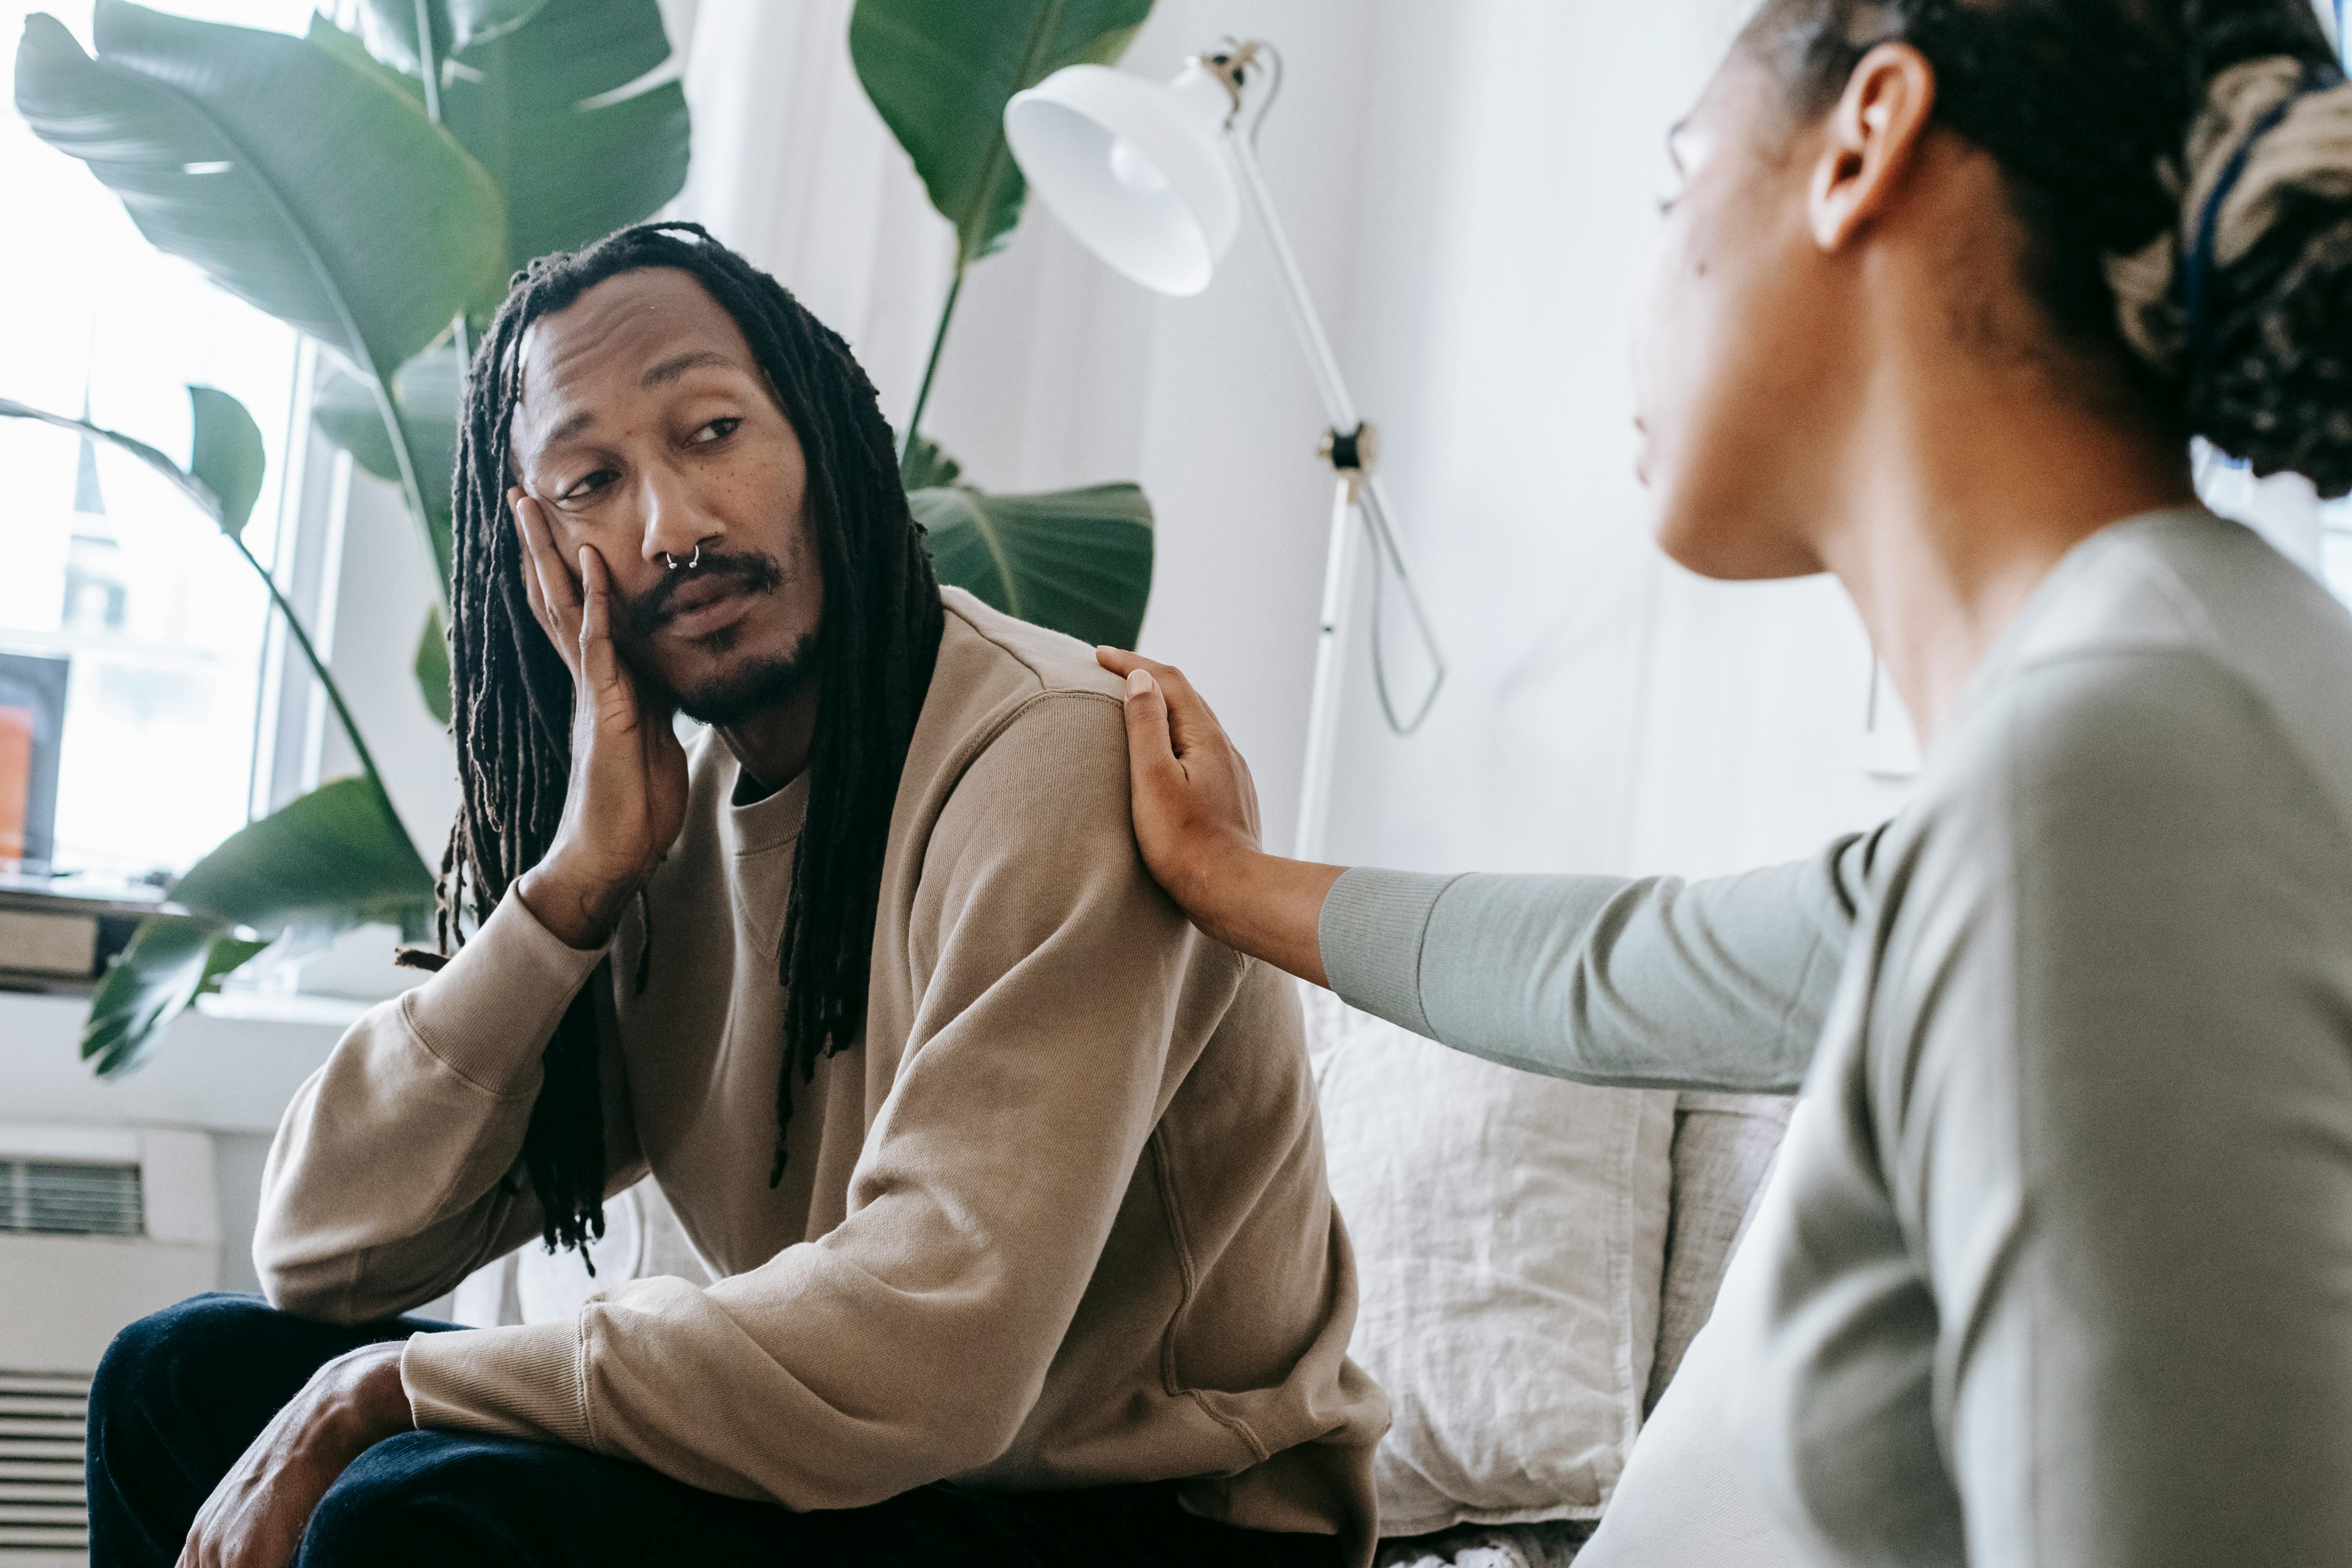 A woman comforting a depressed man | Source: Pexels